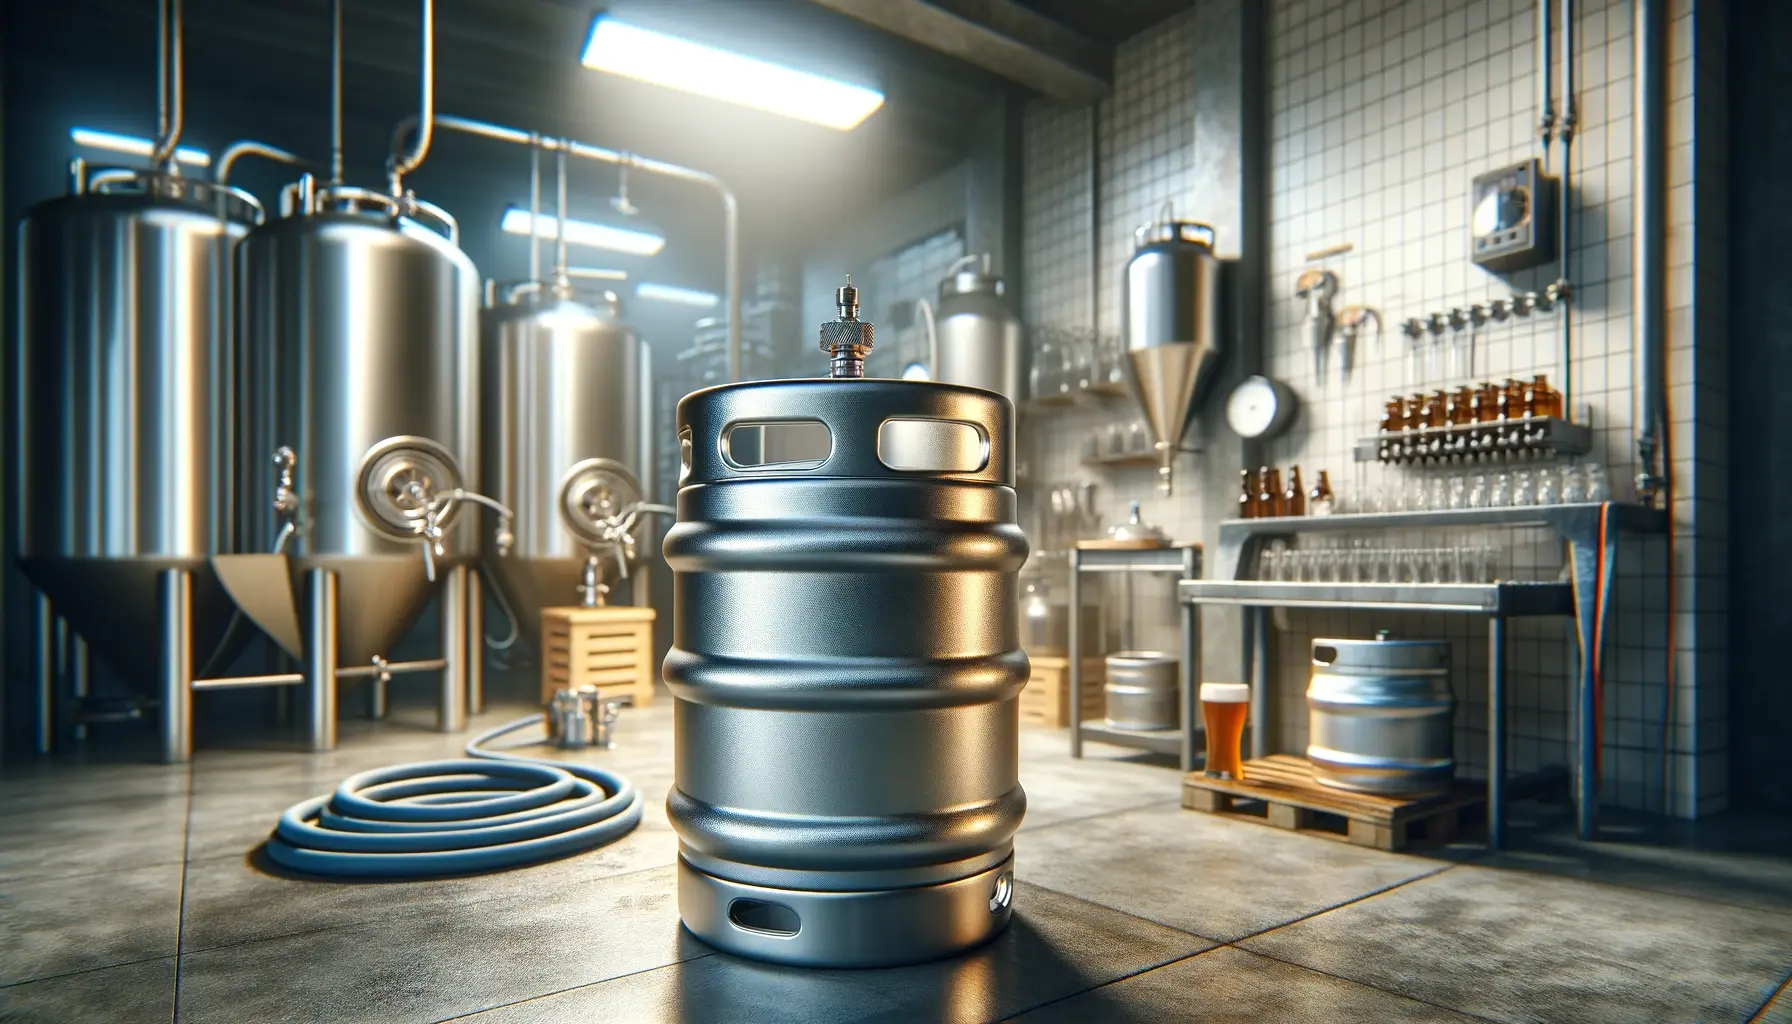 sanitized and ready-to-use keg in a home brewery setting. The image should show a clean, shiny stainless steel keg